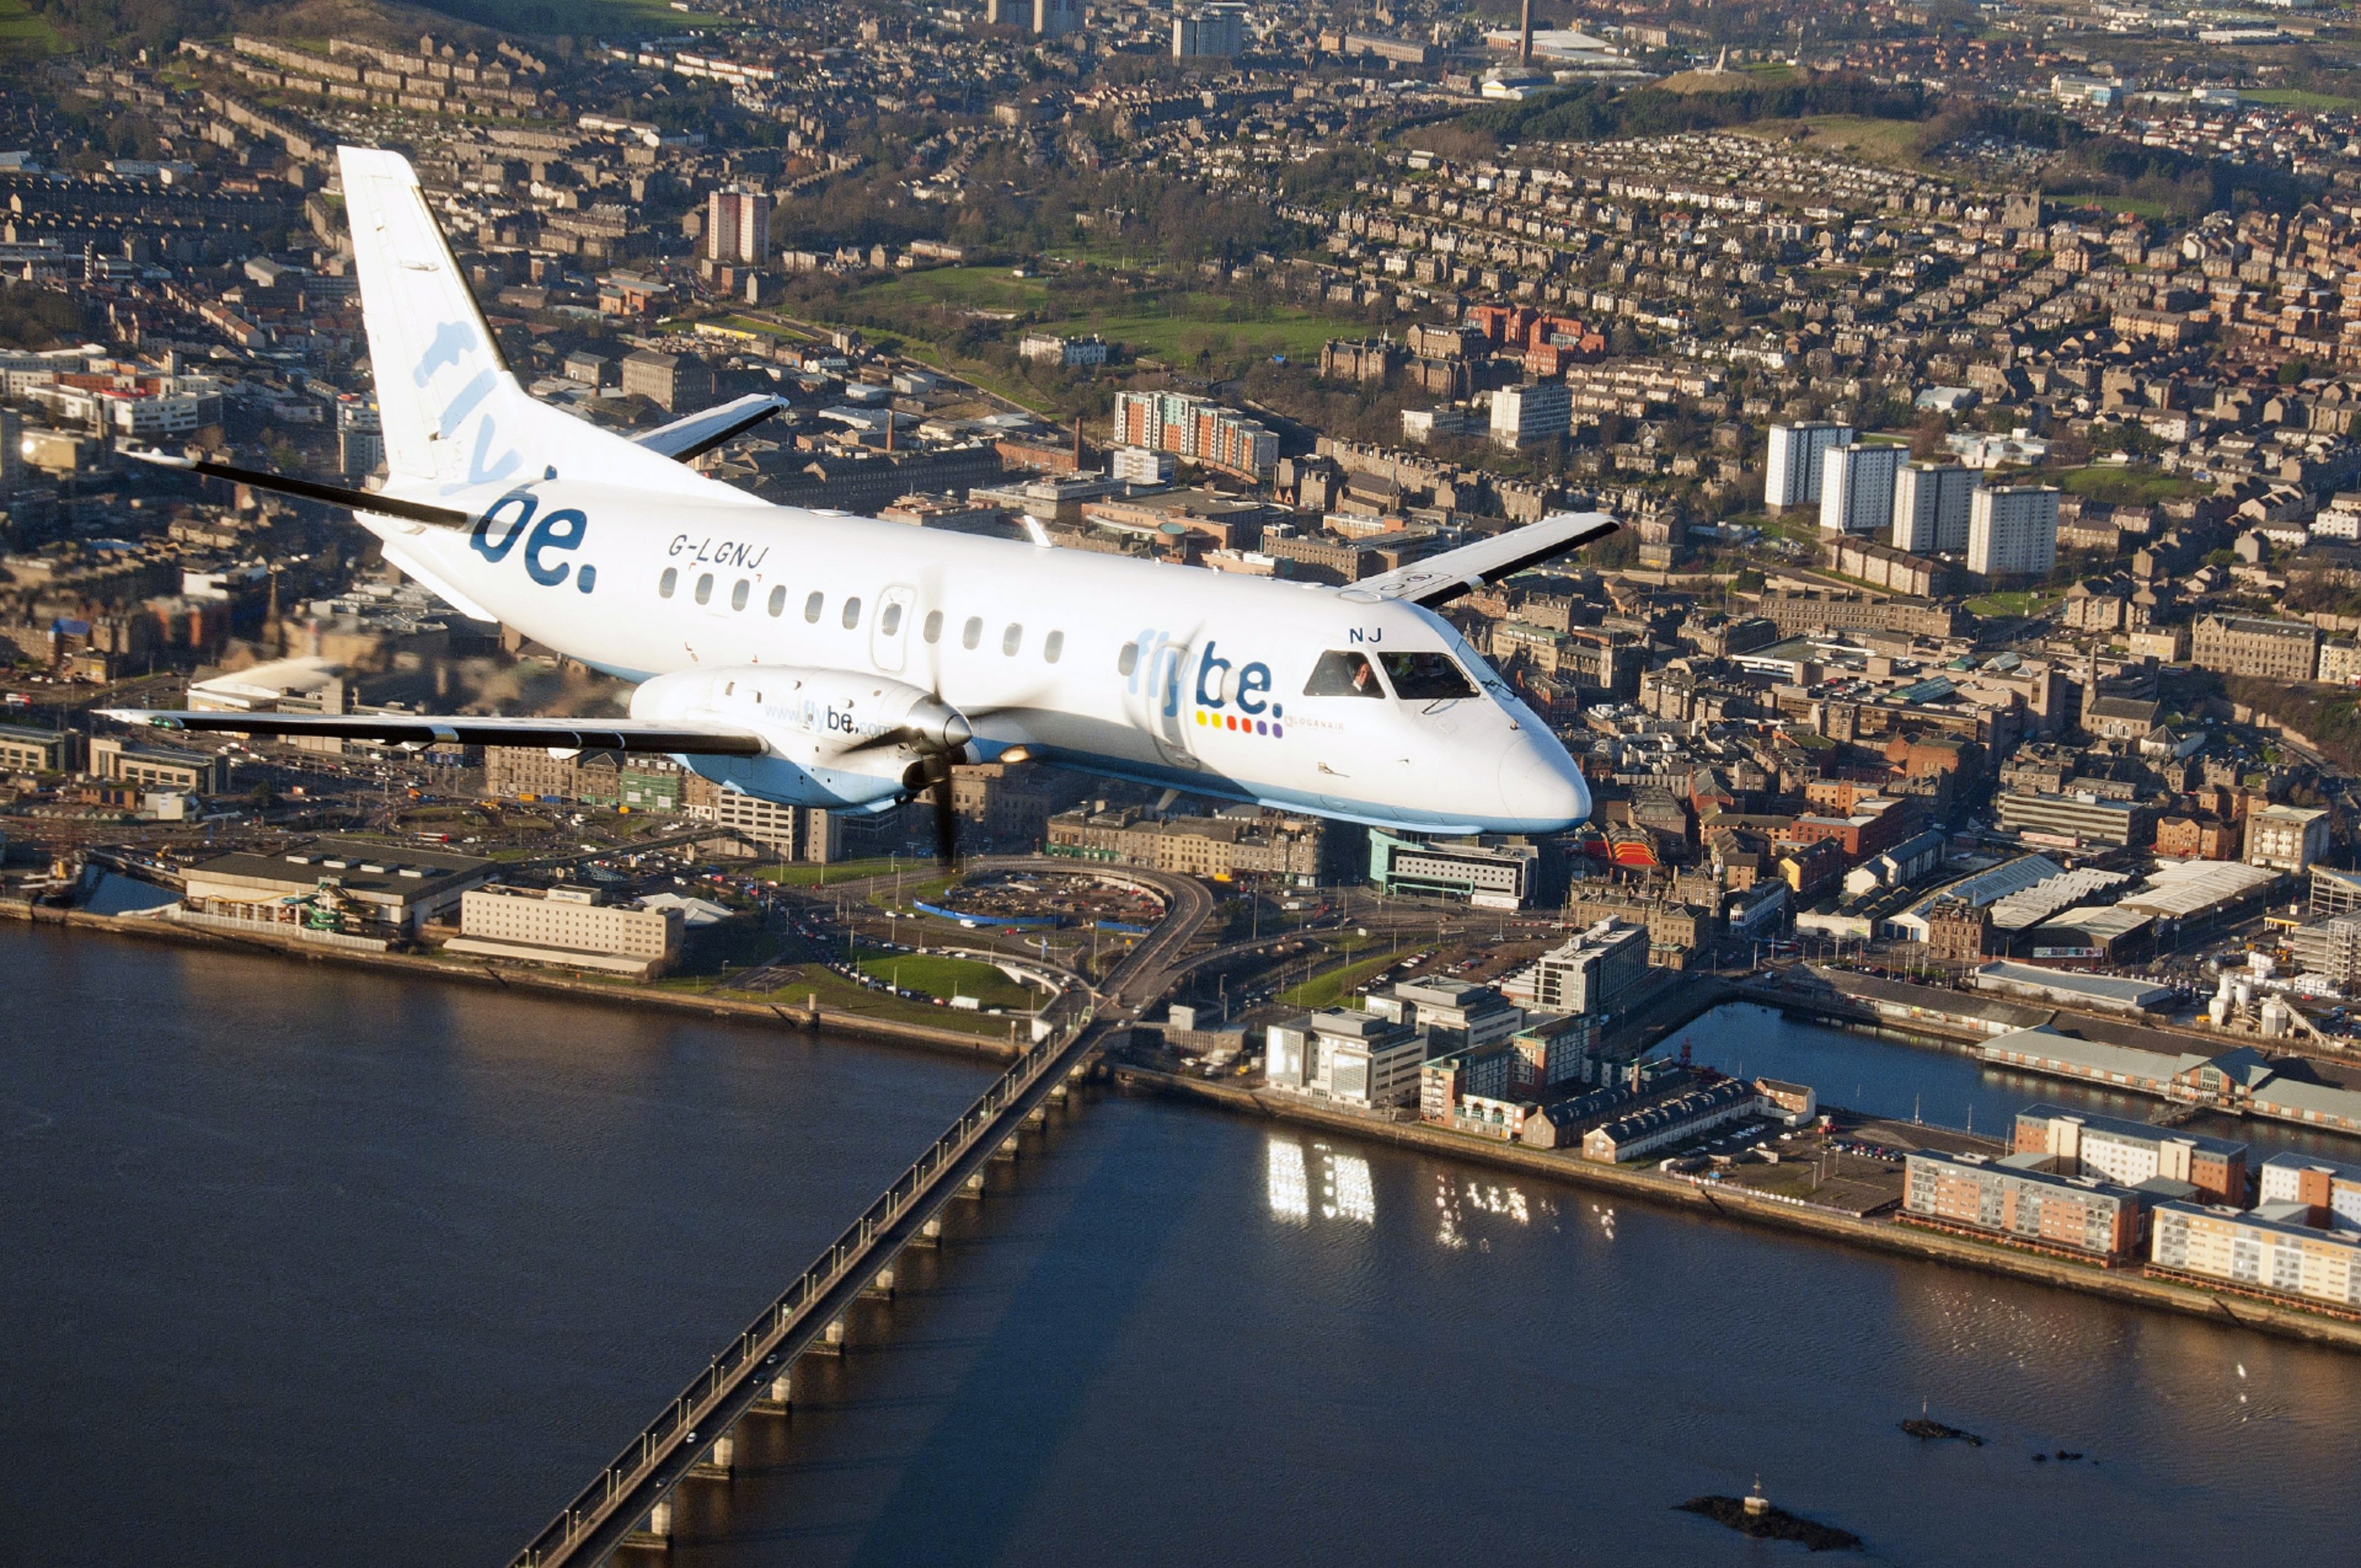 A Flybe aircraft over Dundee.